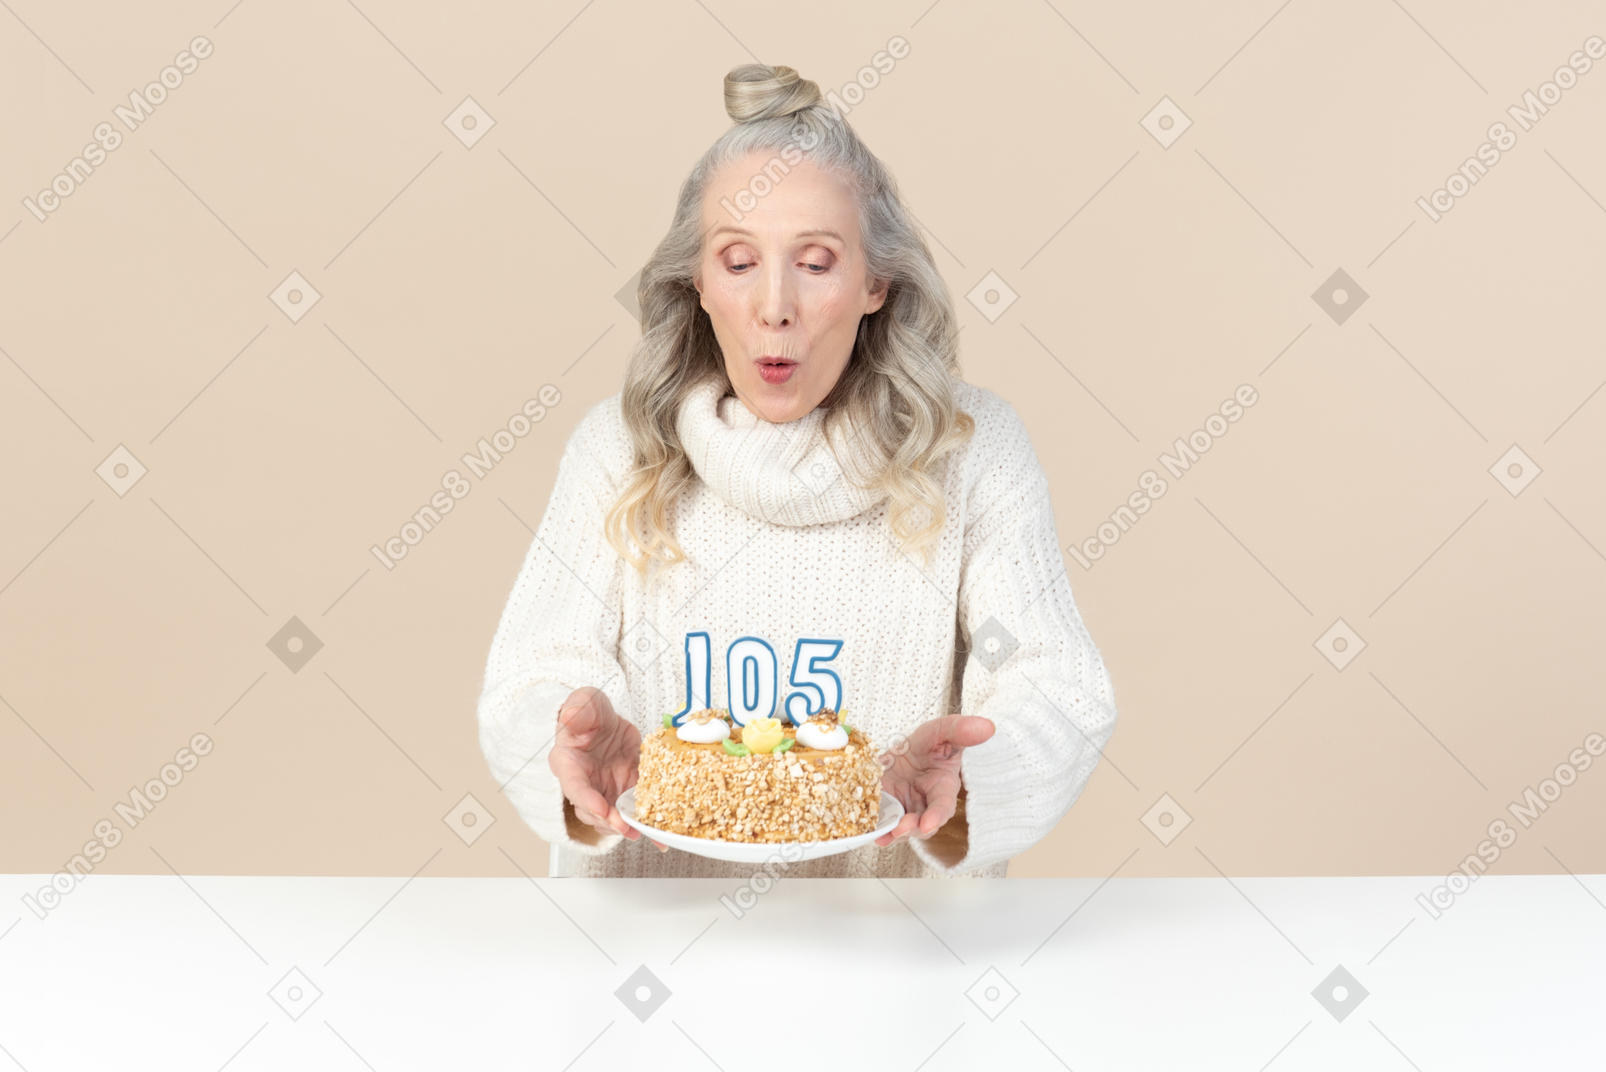 Old woman blowing out the candles on cake for her hundred and fifth birthday